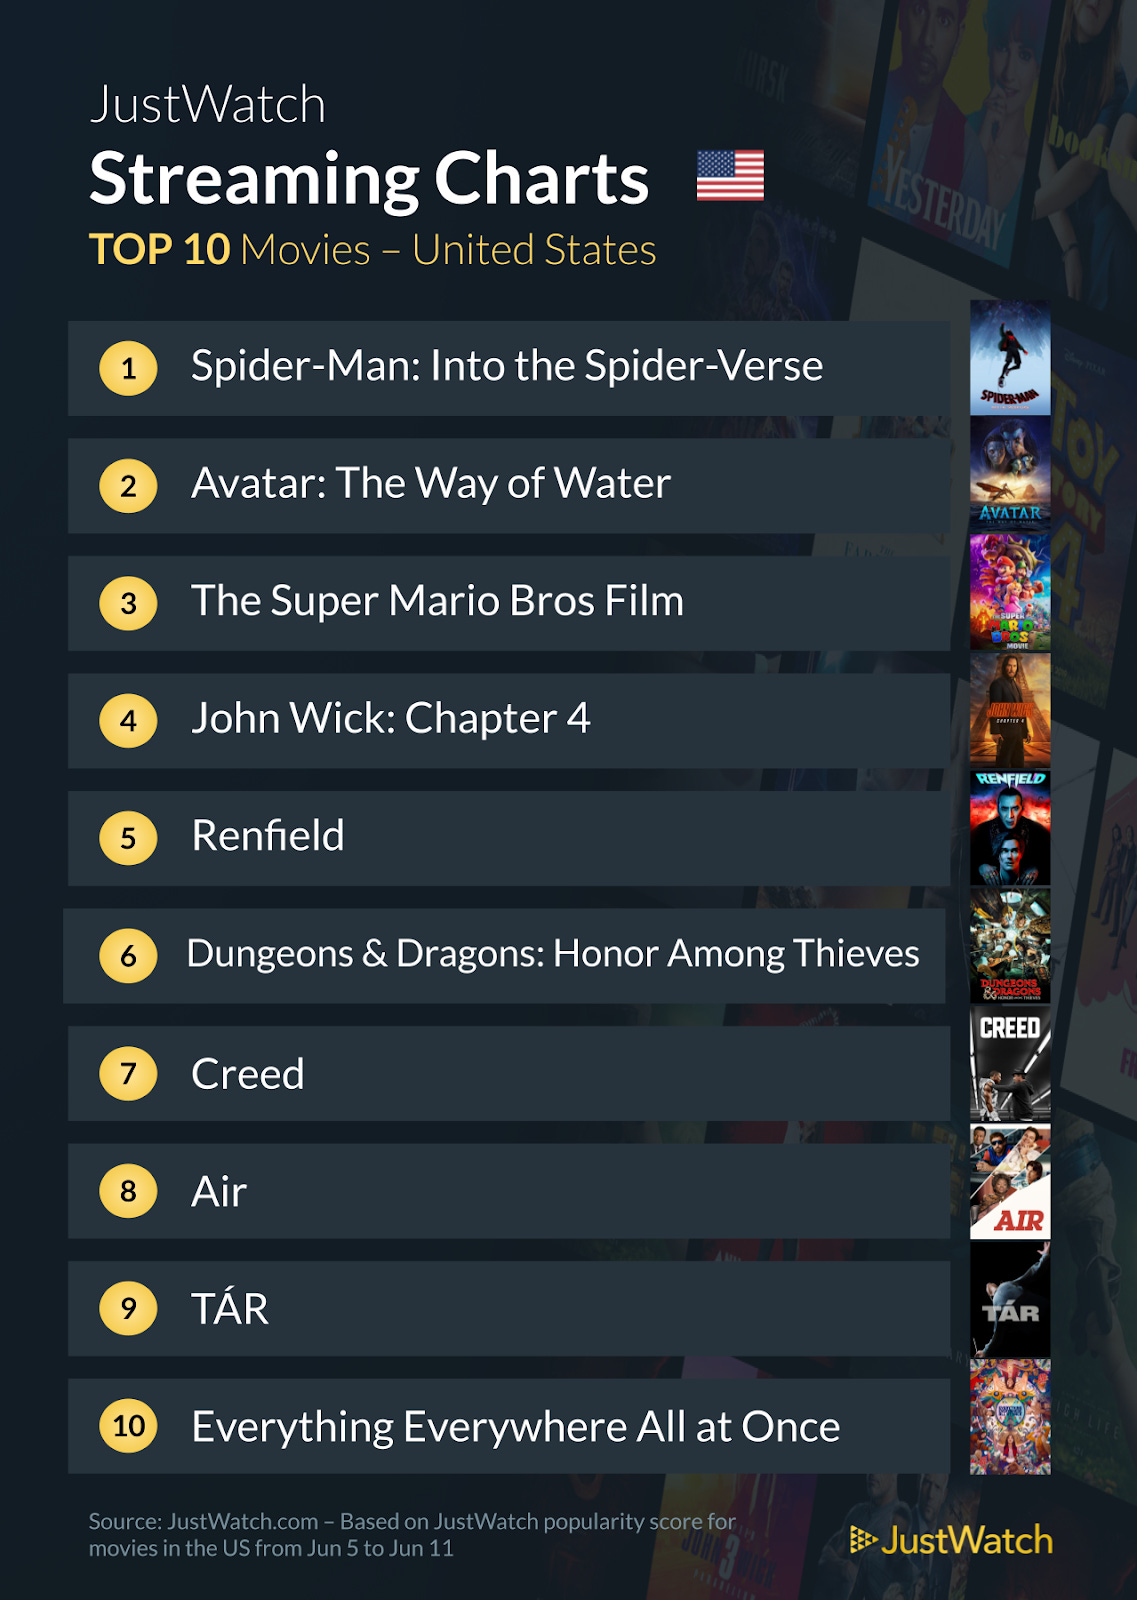 Avengers: Endgame Already in Top Five Rated IMDb Movies of All Time